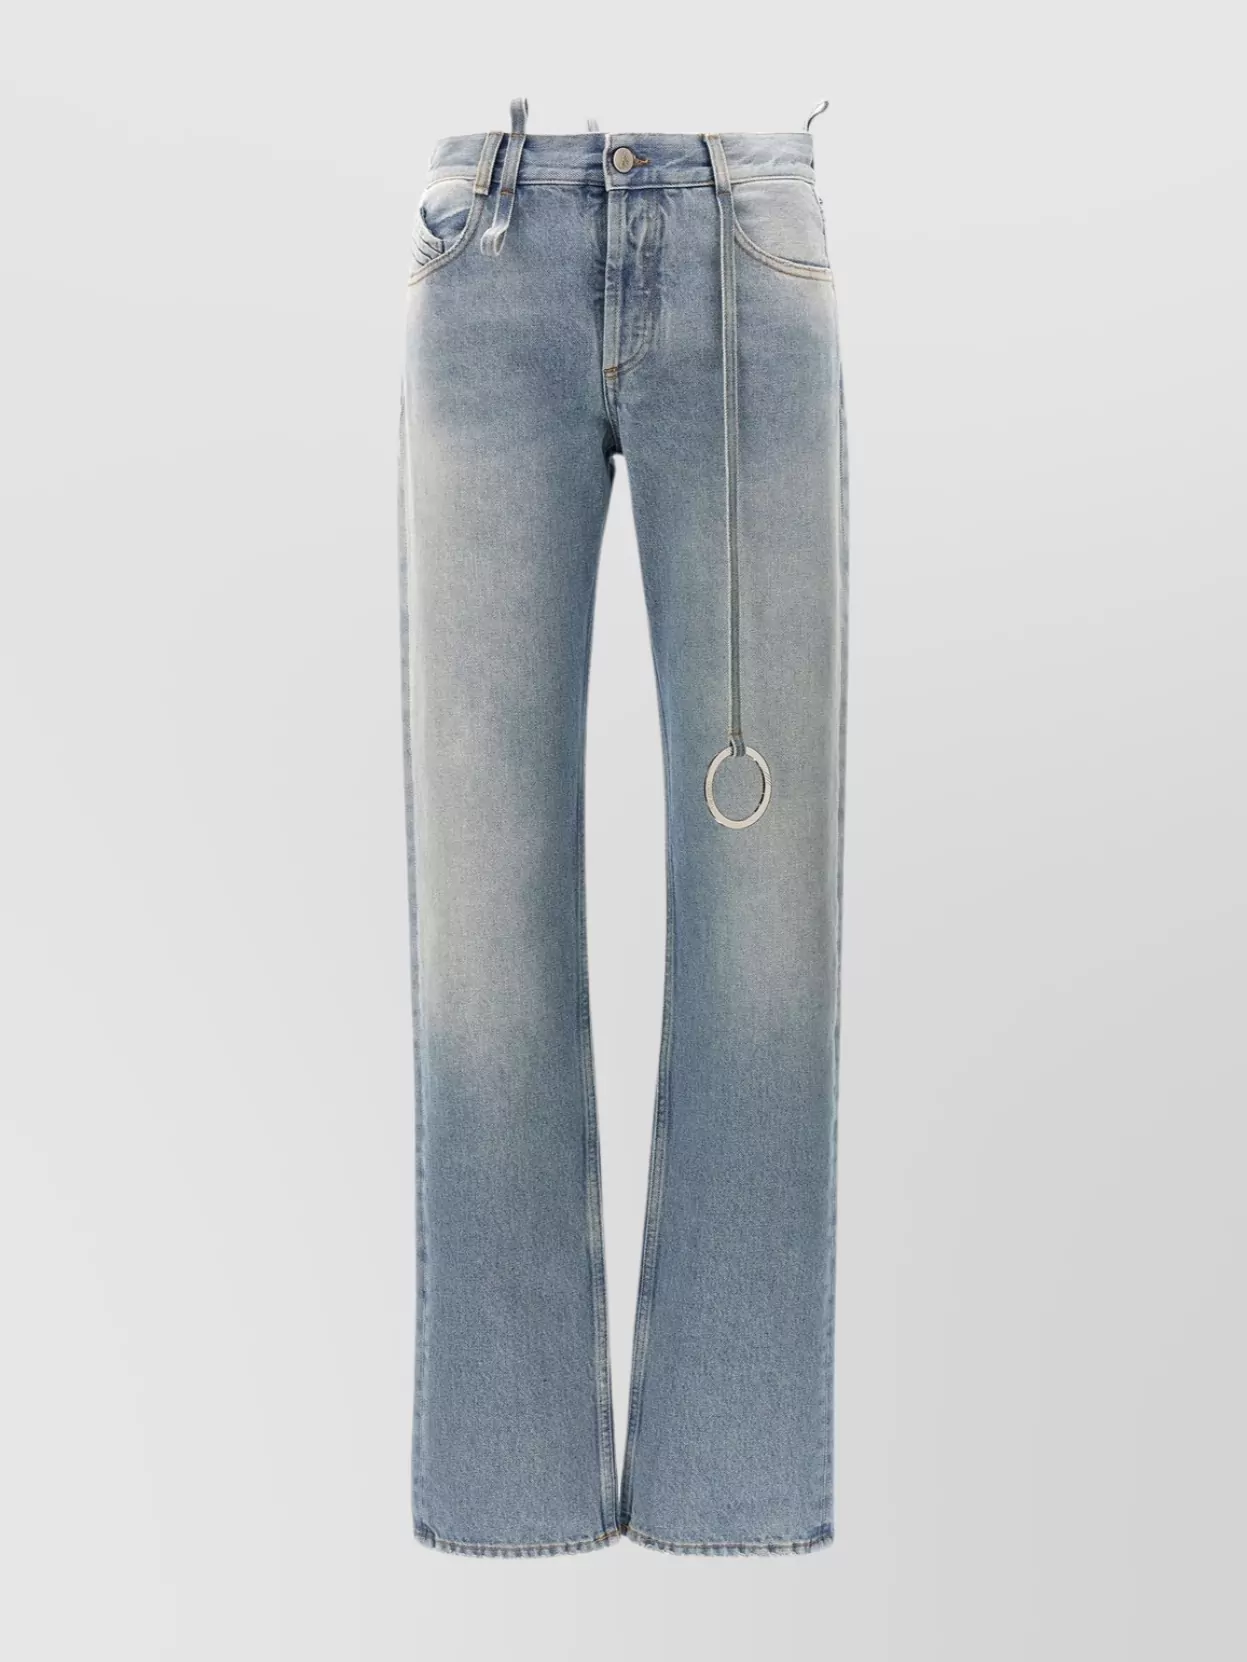 Attico Straight Leg Jeans With Belt Loops